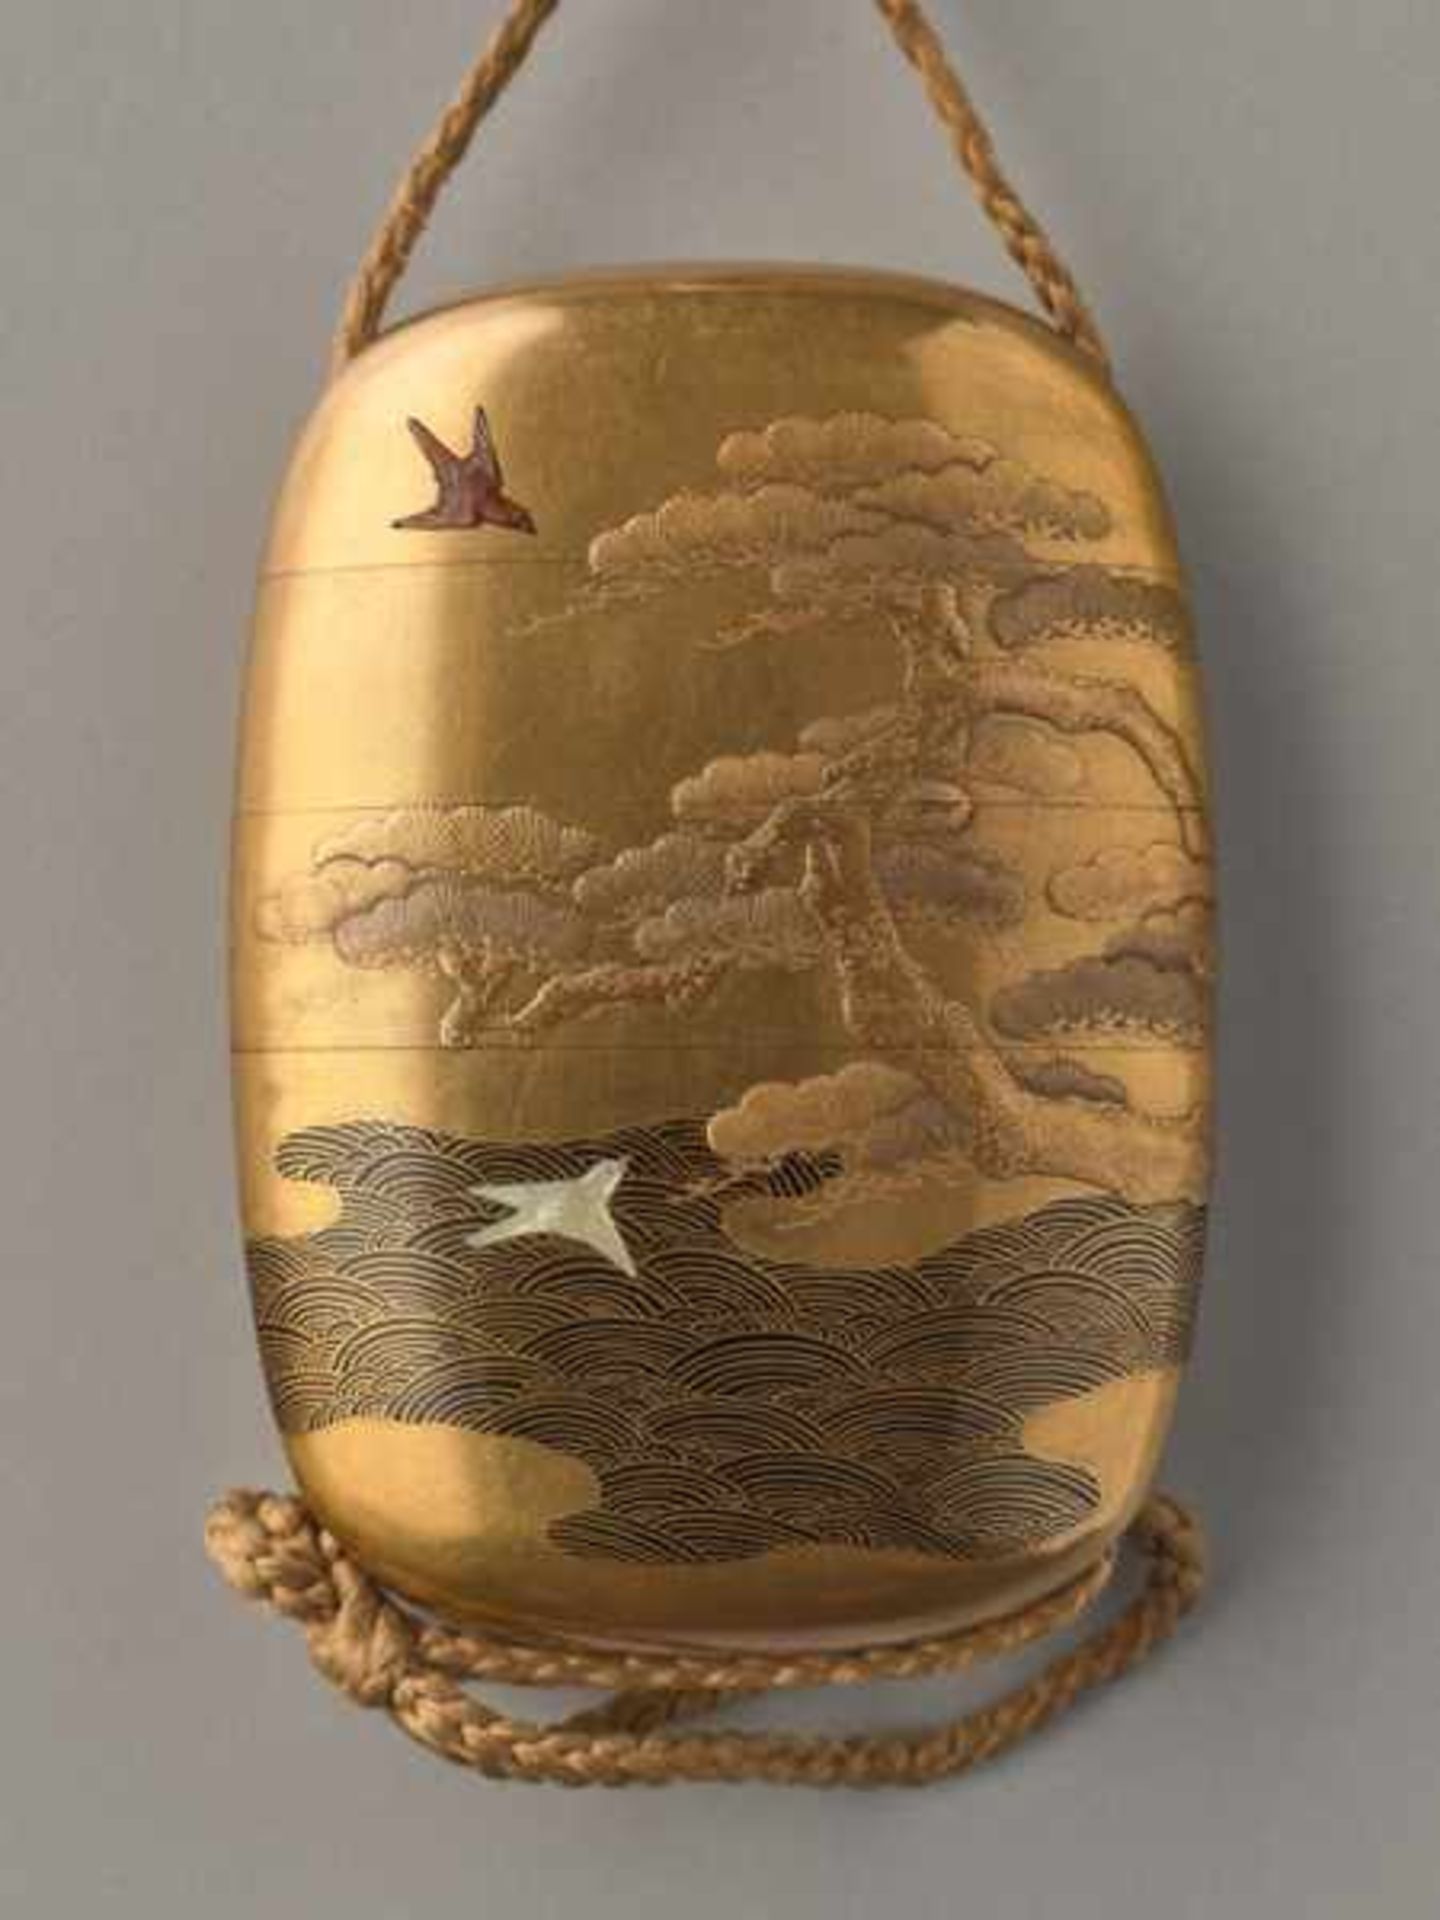 A FOUR CASE LACQUER AND GOLD INRO BY SHOKYOSAI Lacquer and gold inro with inlays, lacquer ojime - Image 4 of 5